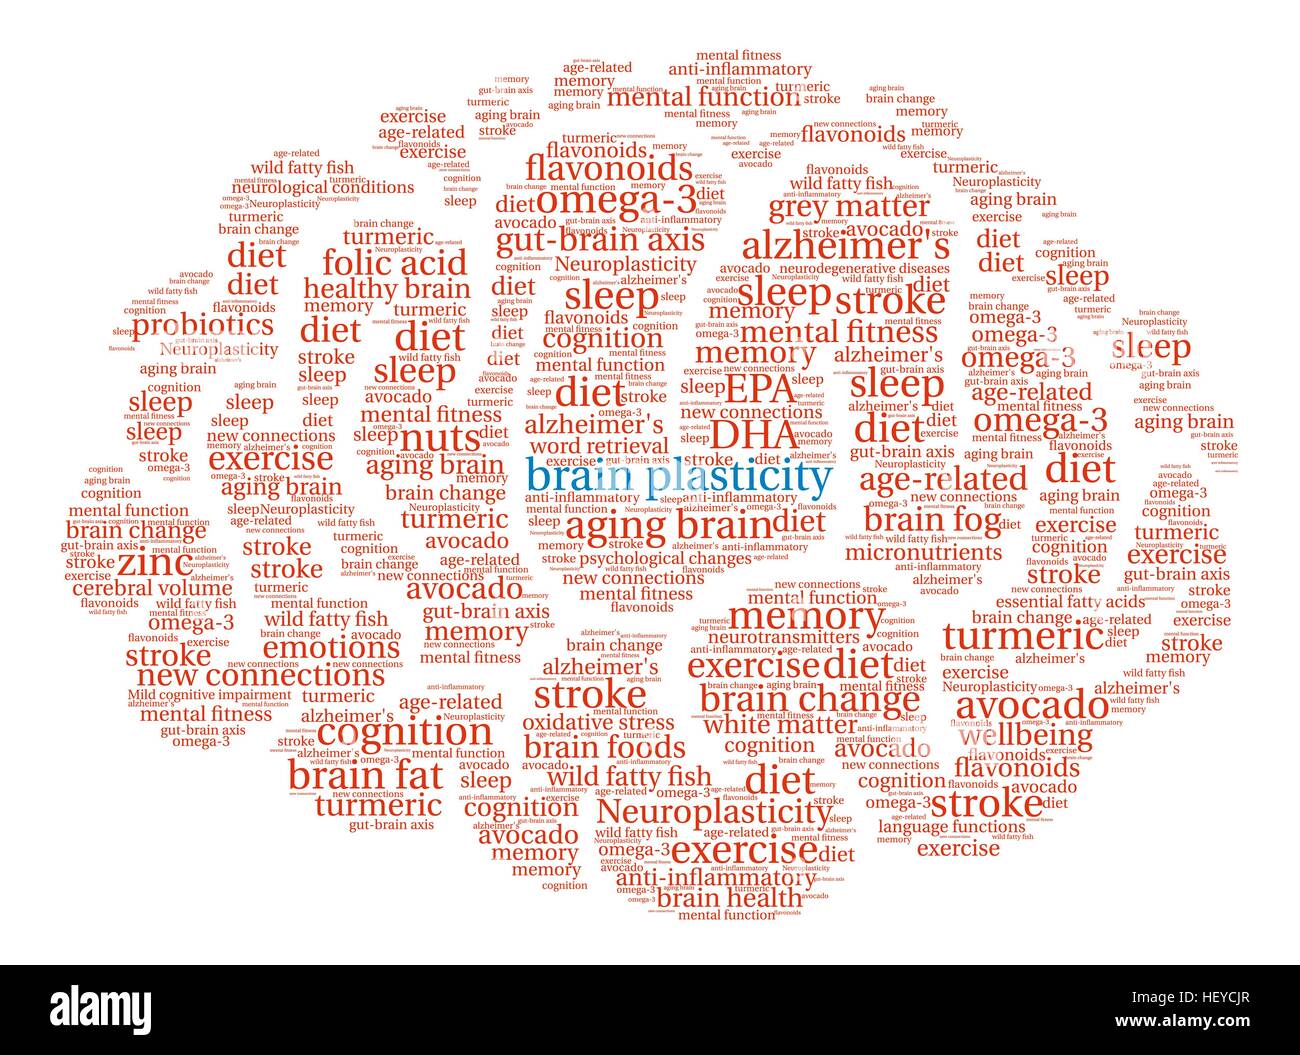 Brain Plasticity Brain word cloud on a white background. Stock Vector